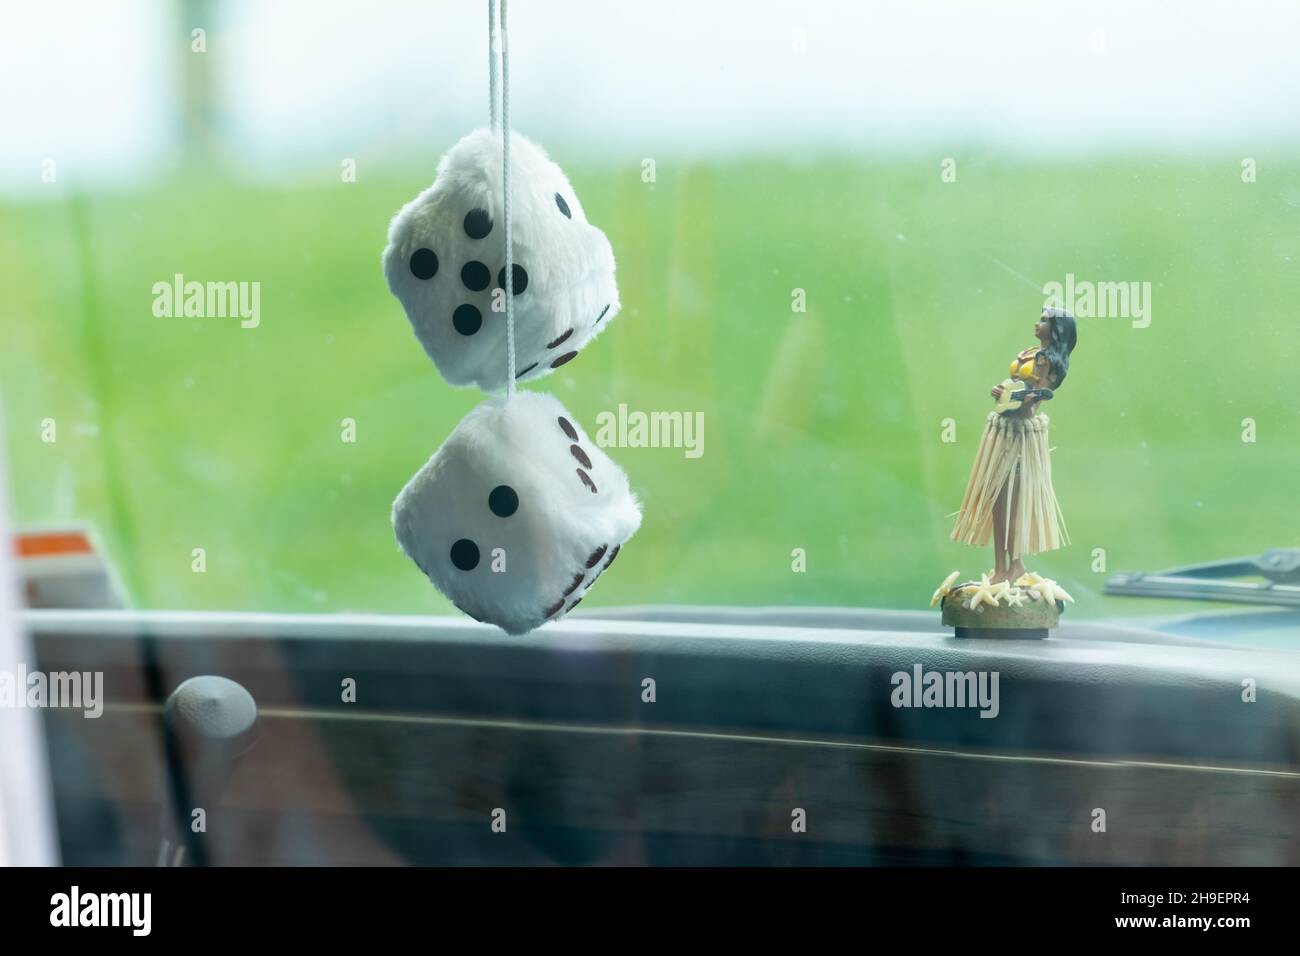 A pair of fuzzy dice hanging from a car's rear-view mirror beside a small dancing native lady on dashboard. Stock Photo